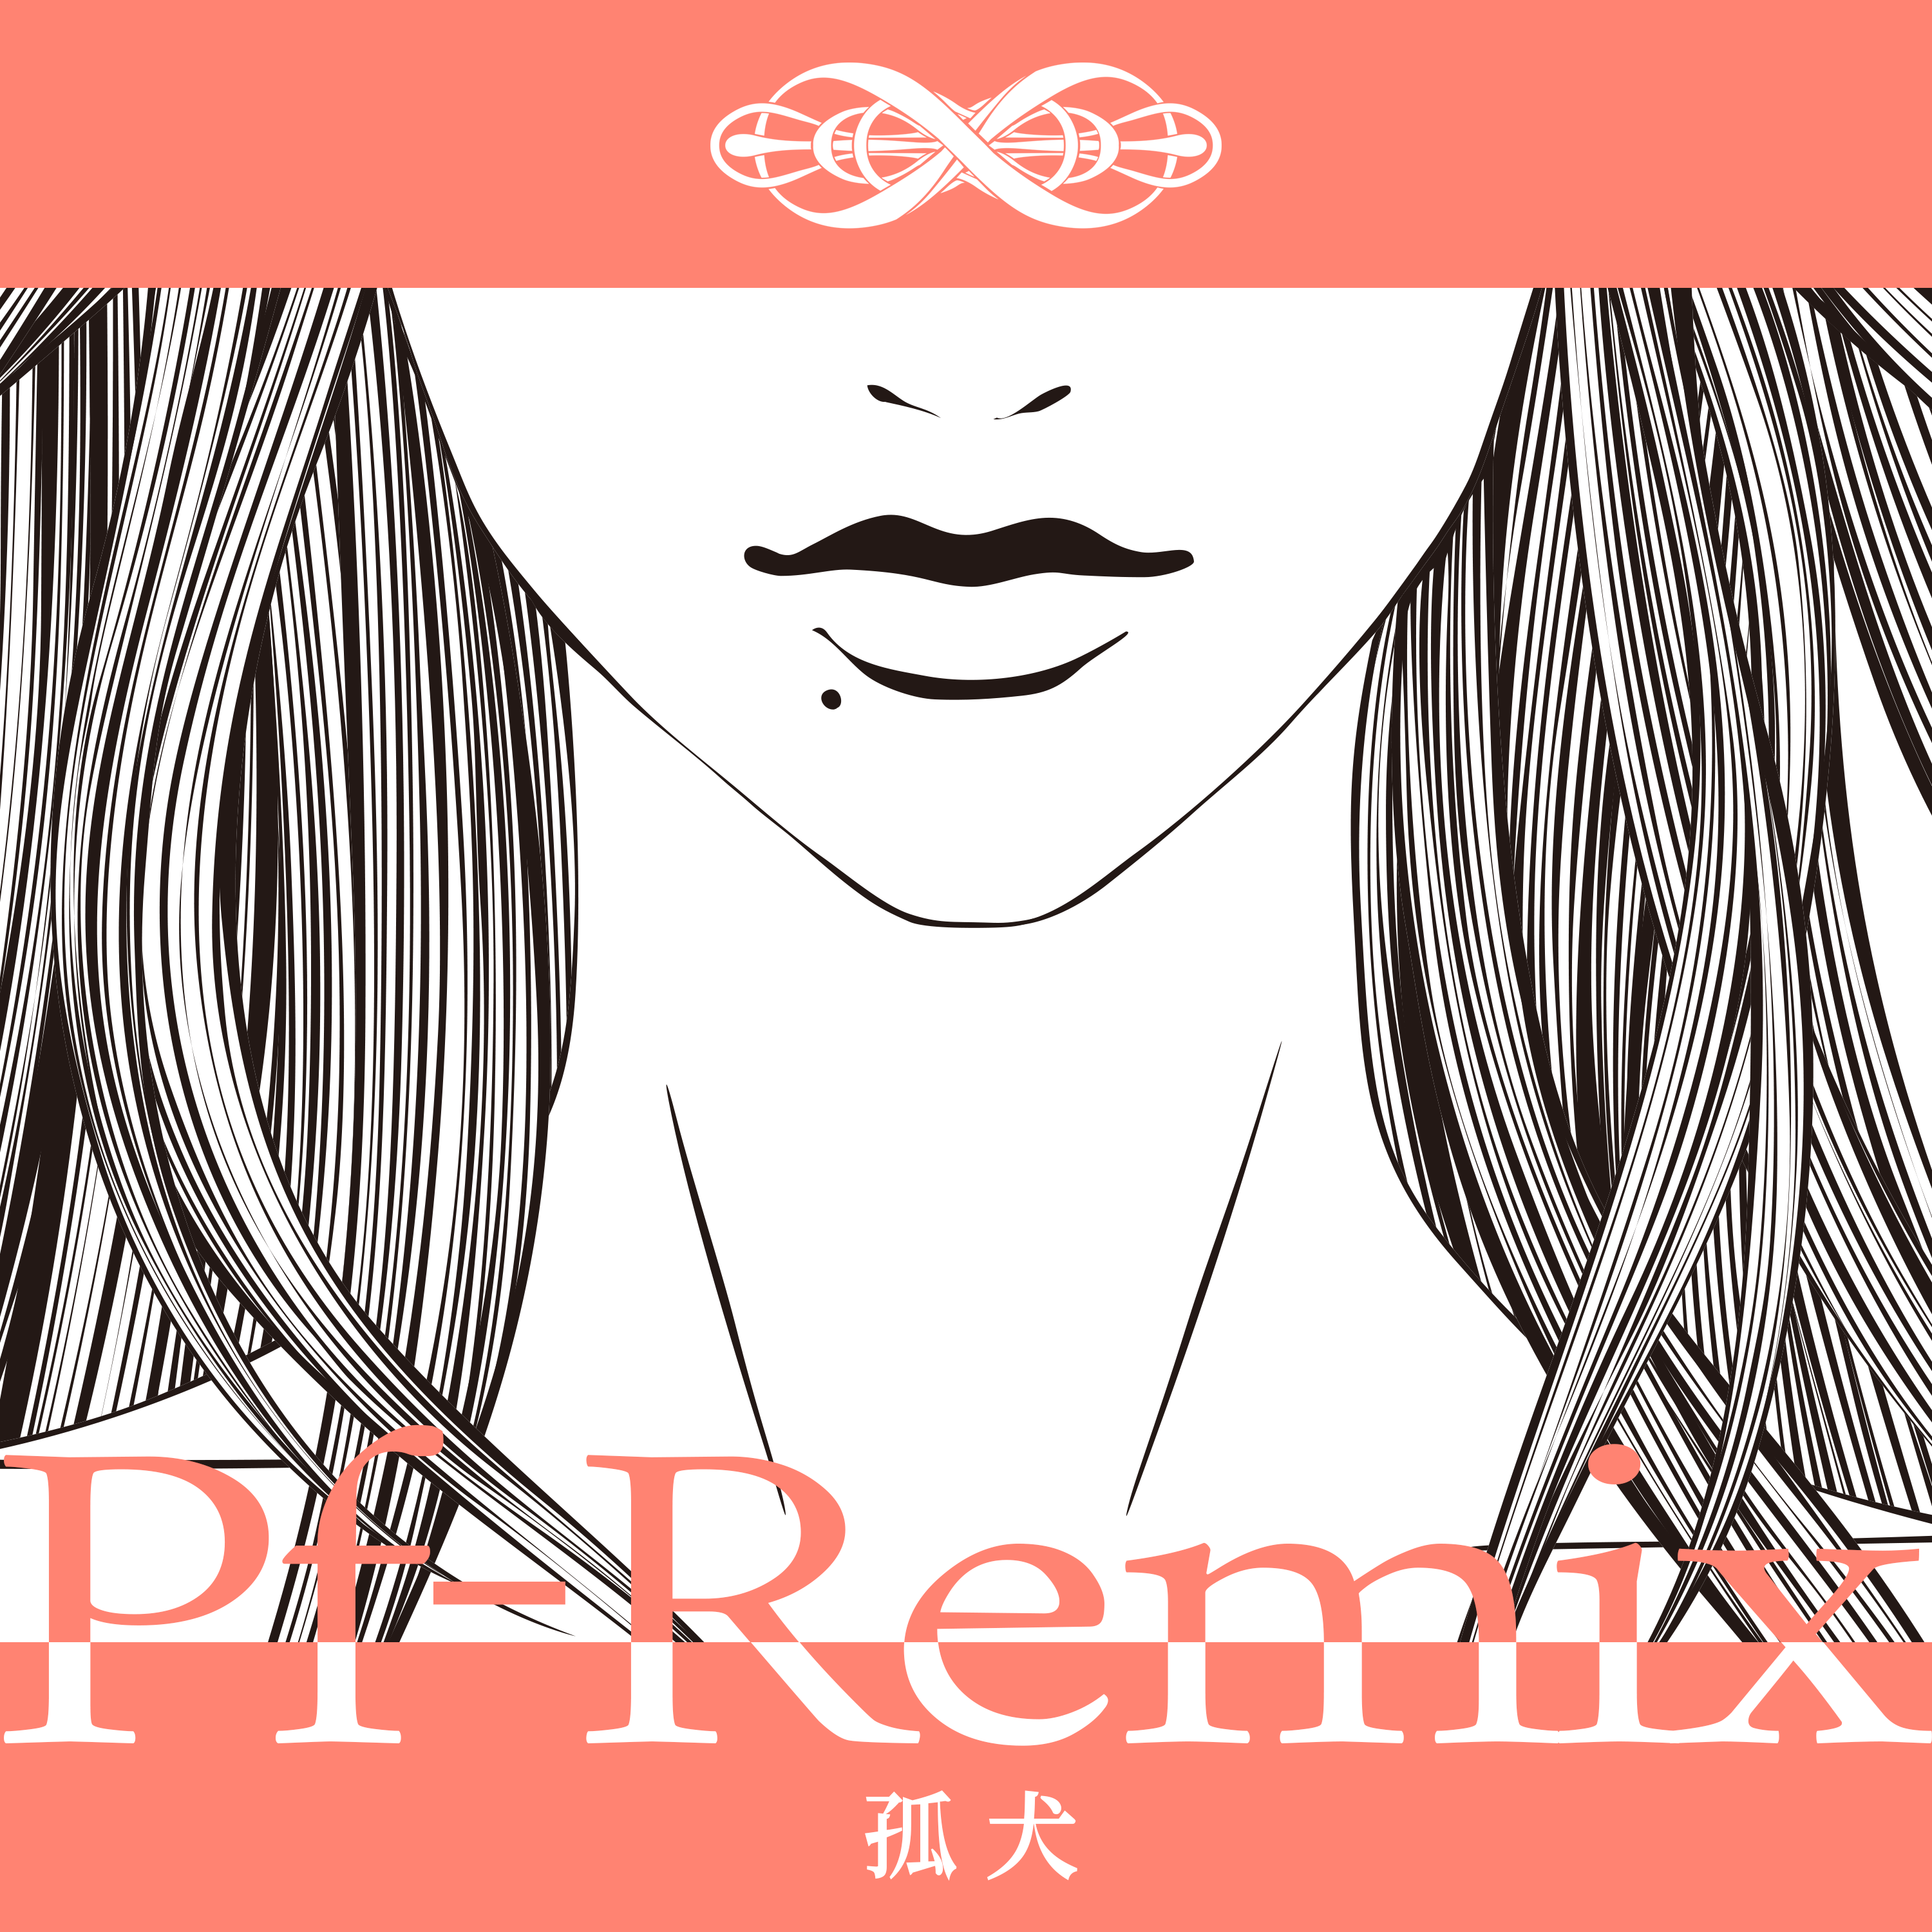 nowisee「孤犬（Pf-Remix）」